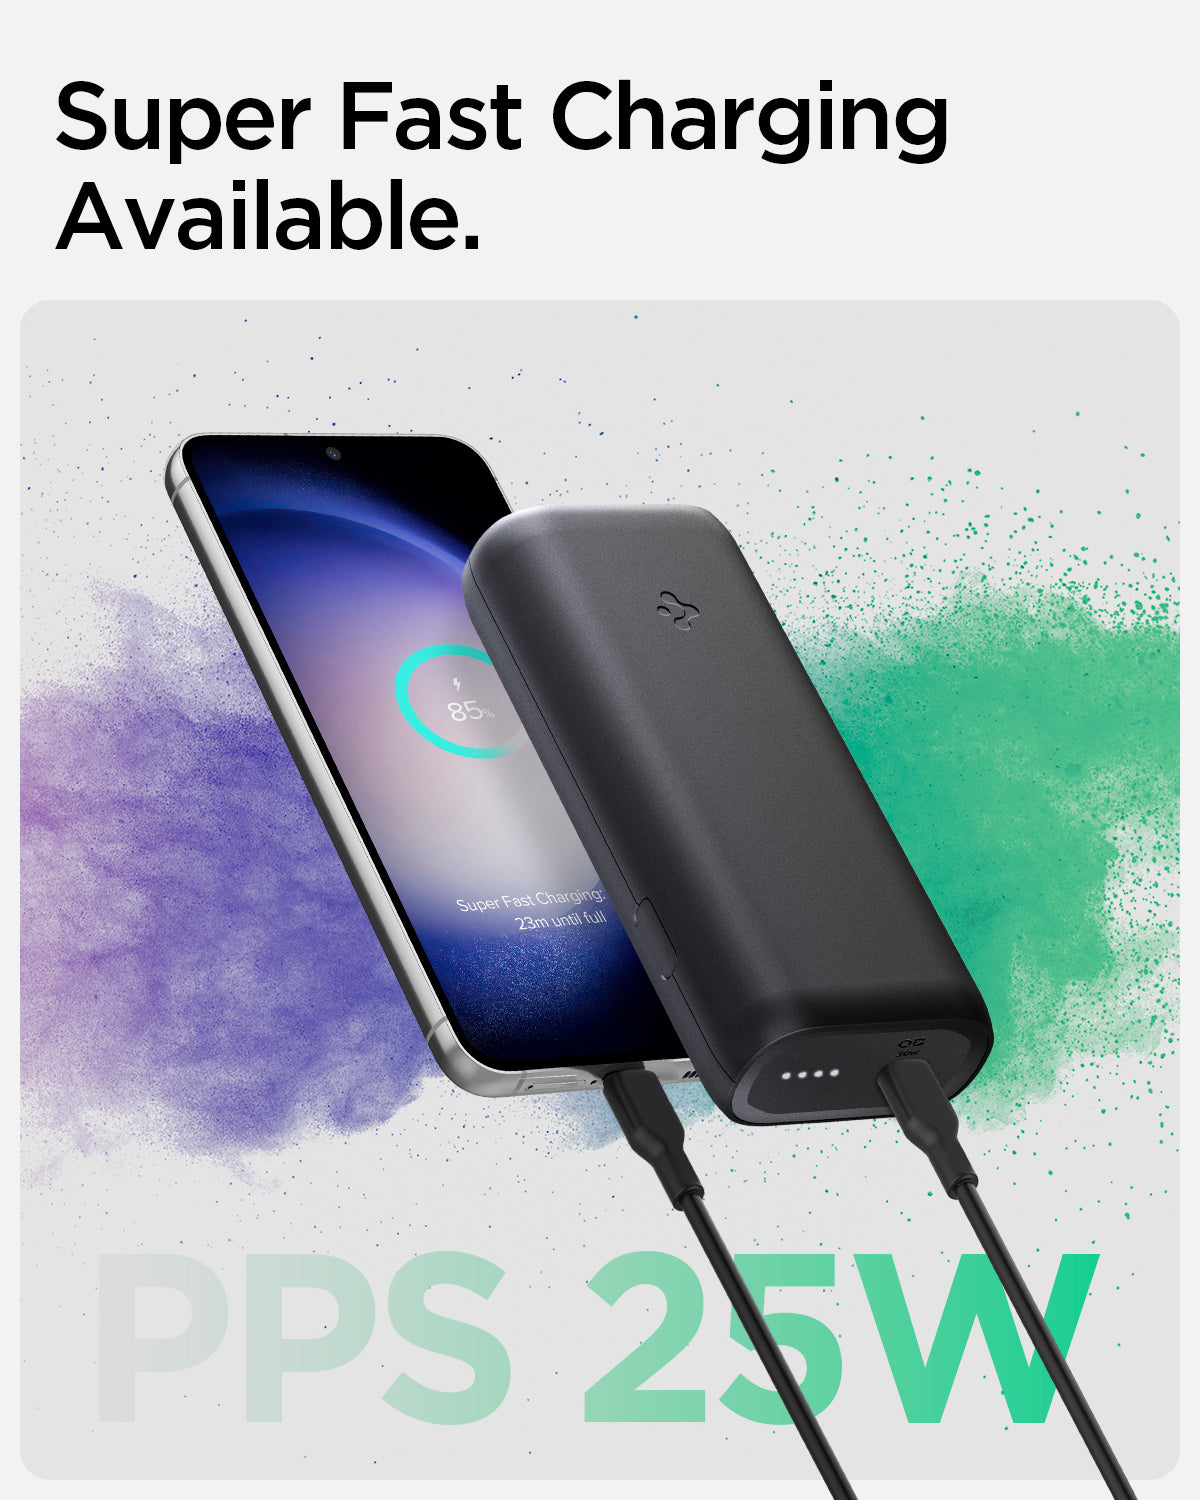 ABA04268 - ArcPack™ Portable Charger PA2100 in Black showing the Super Fast Charging Available. A small portable charger hovering in front of a device while both attached to a charging cable. PPS 25W